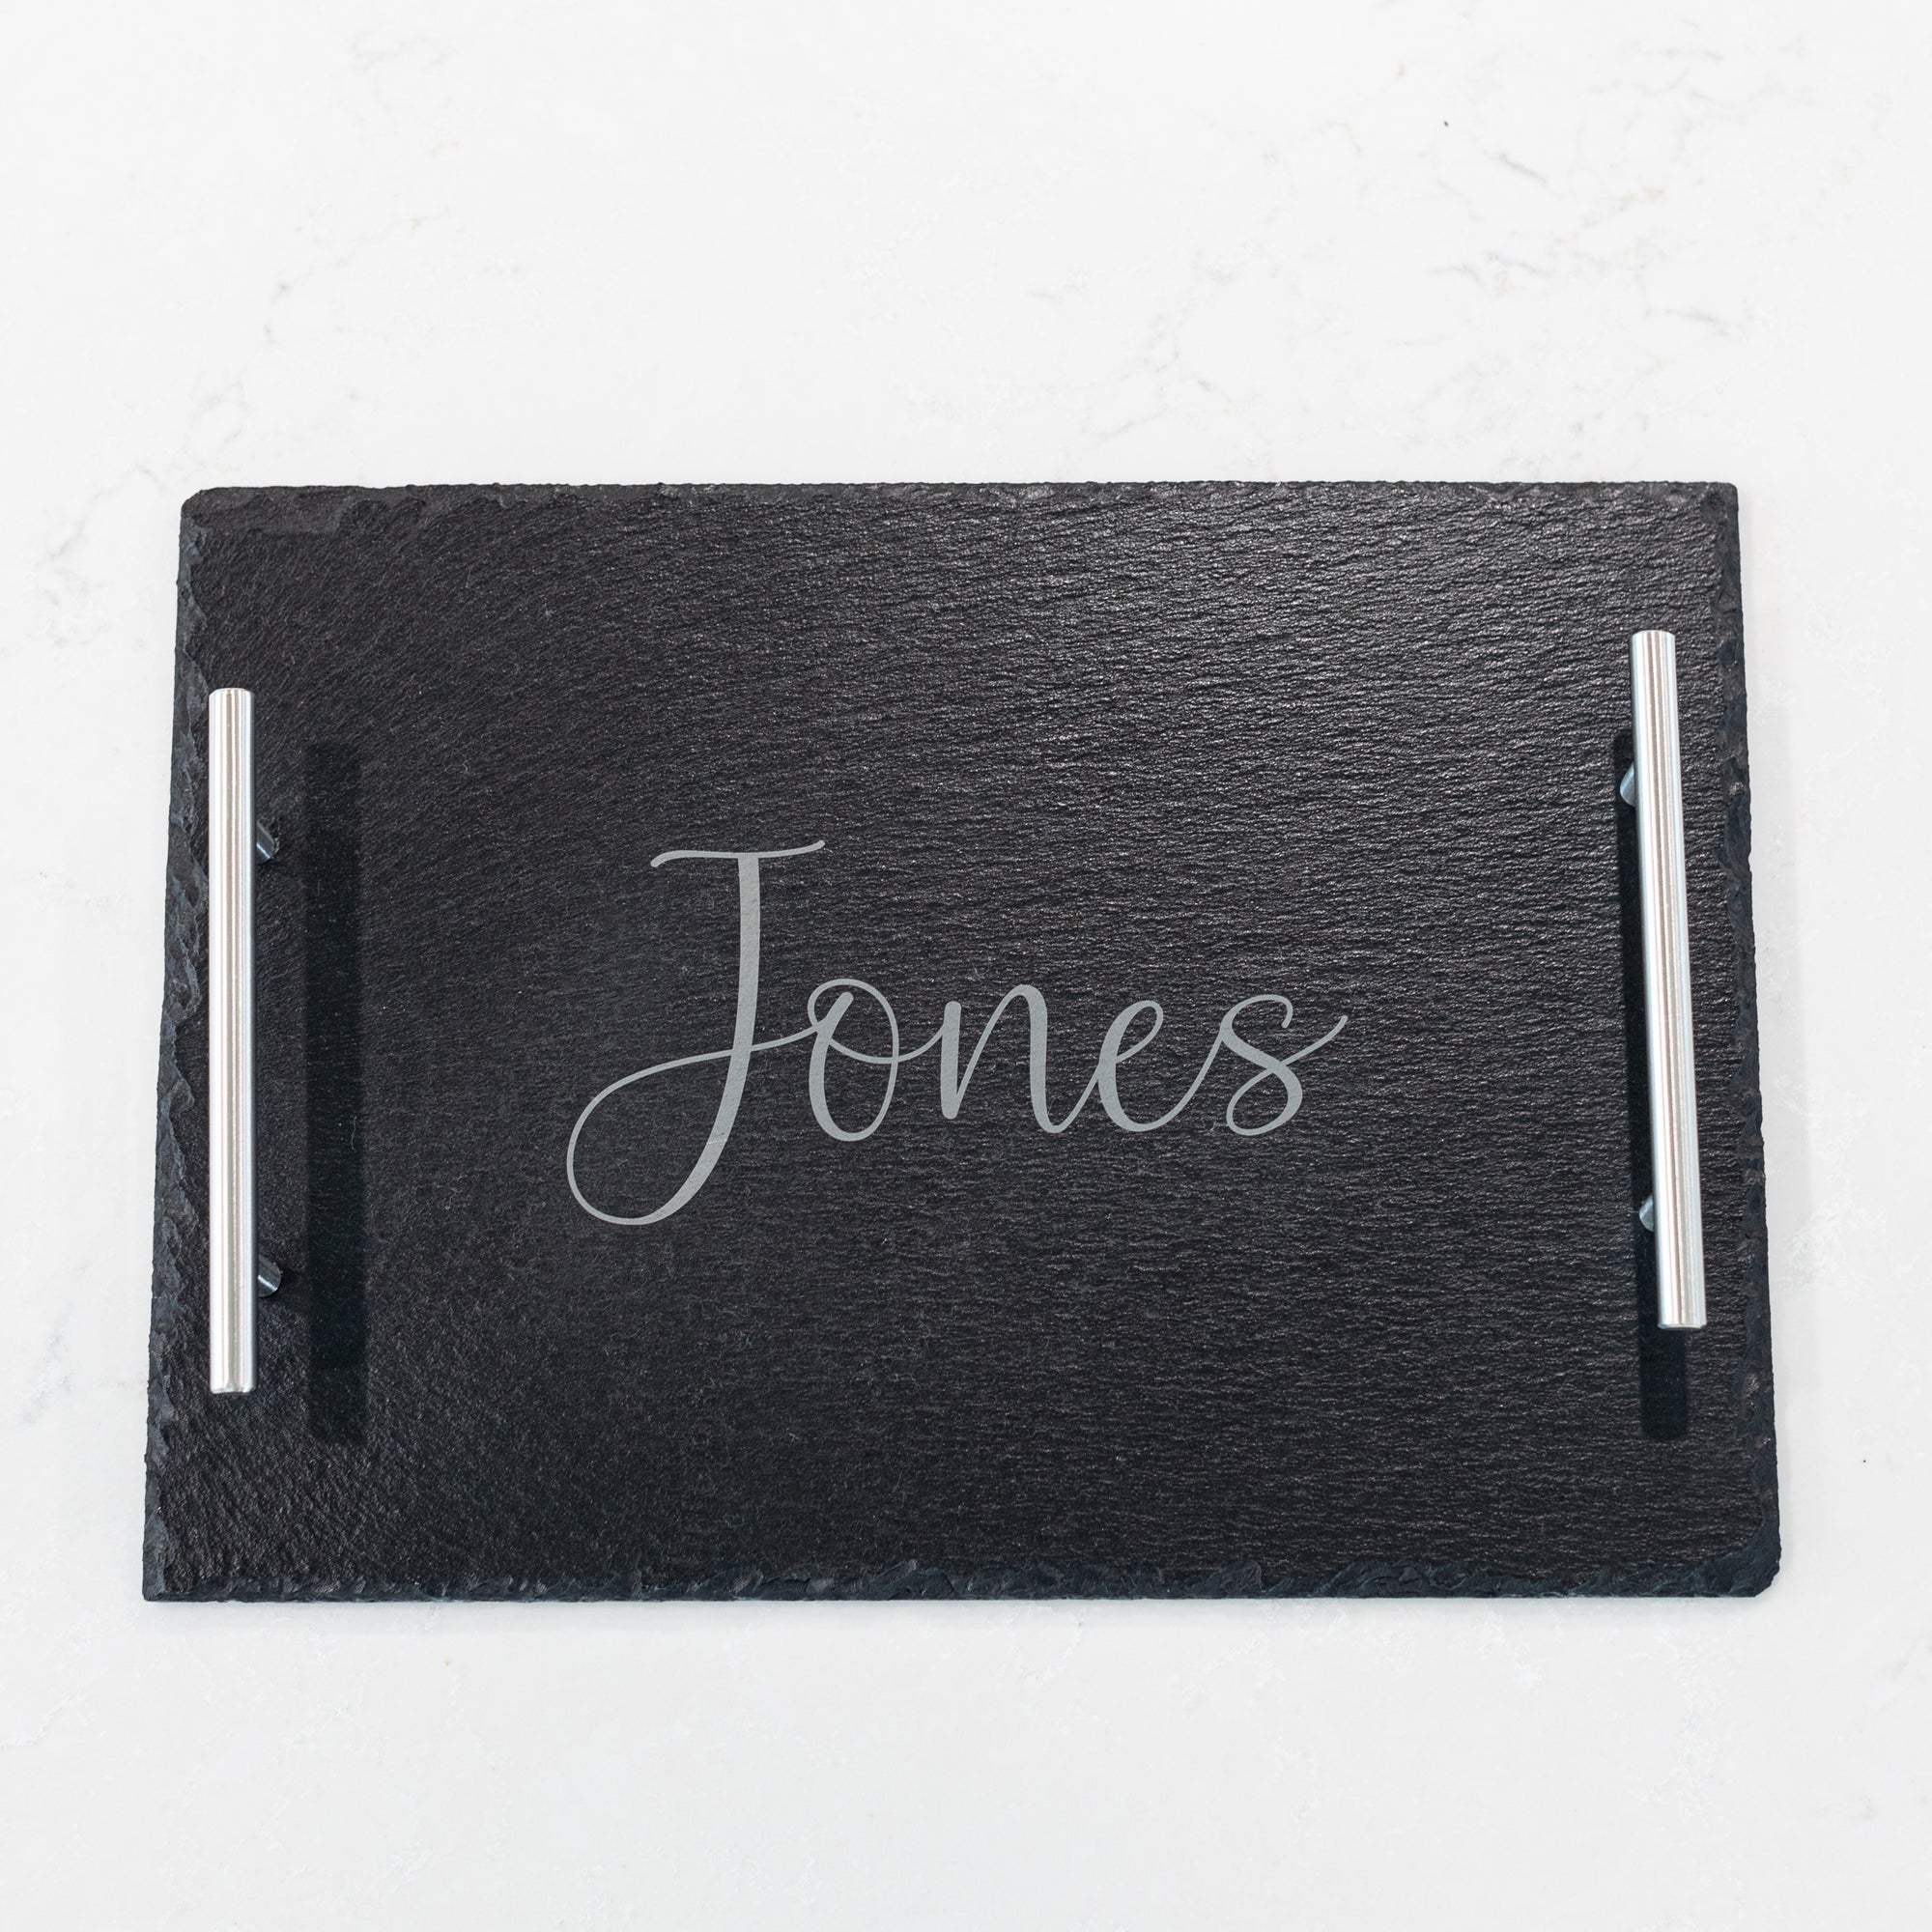 Personalized Slate Serving Tray - 10 x 13.75 inches